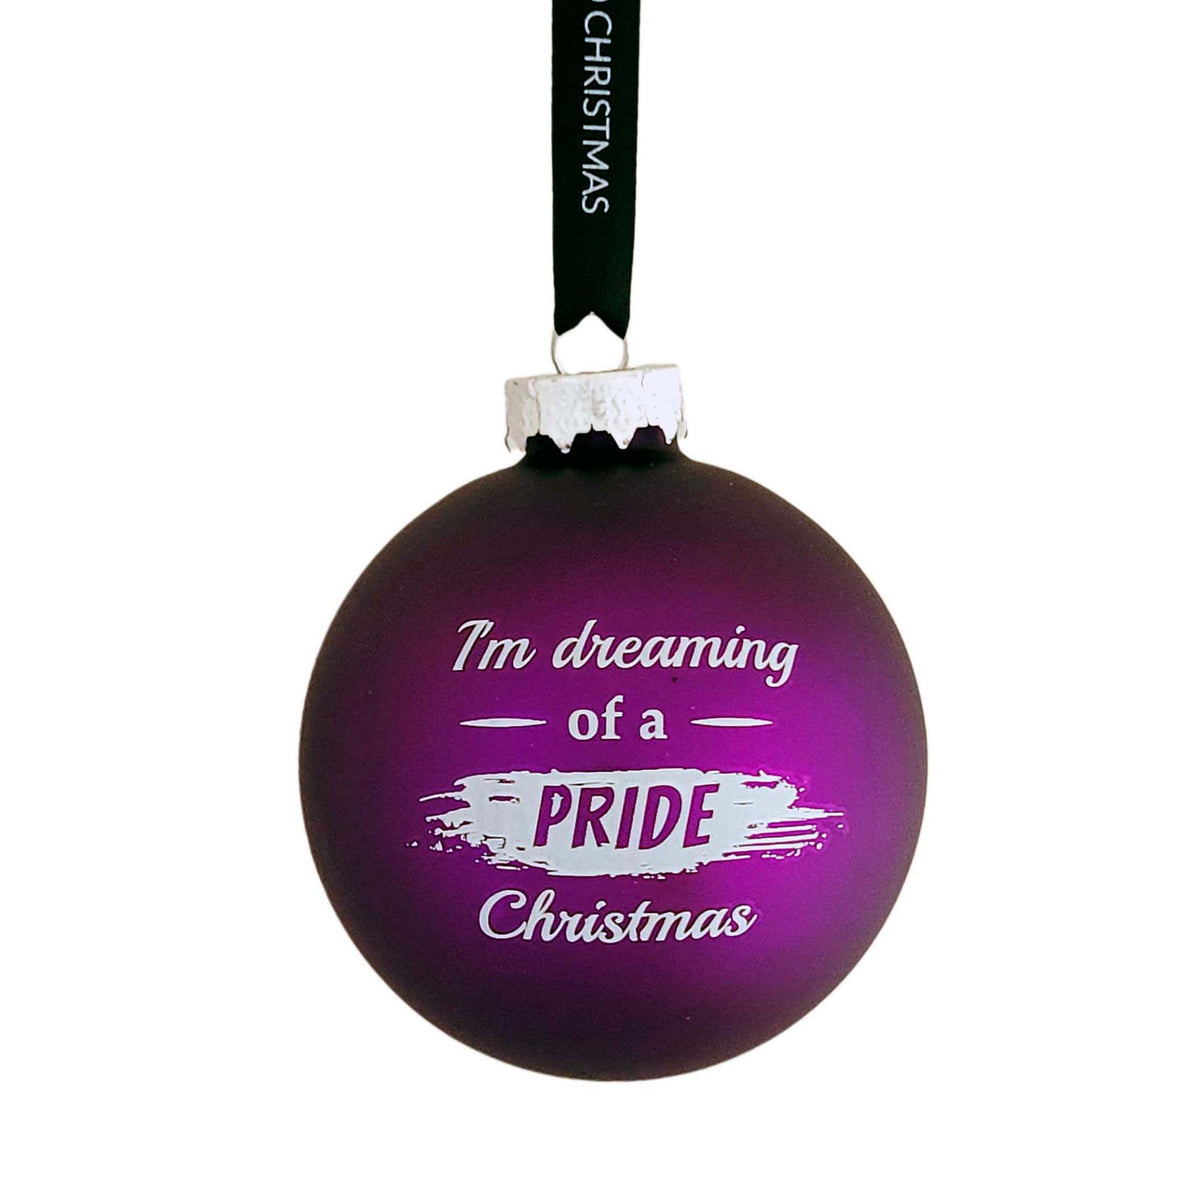 I'm dreaming of a Pride Christmas